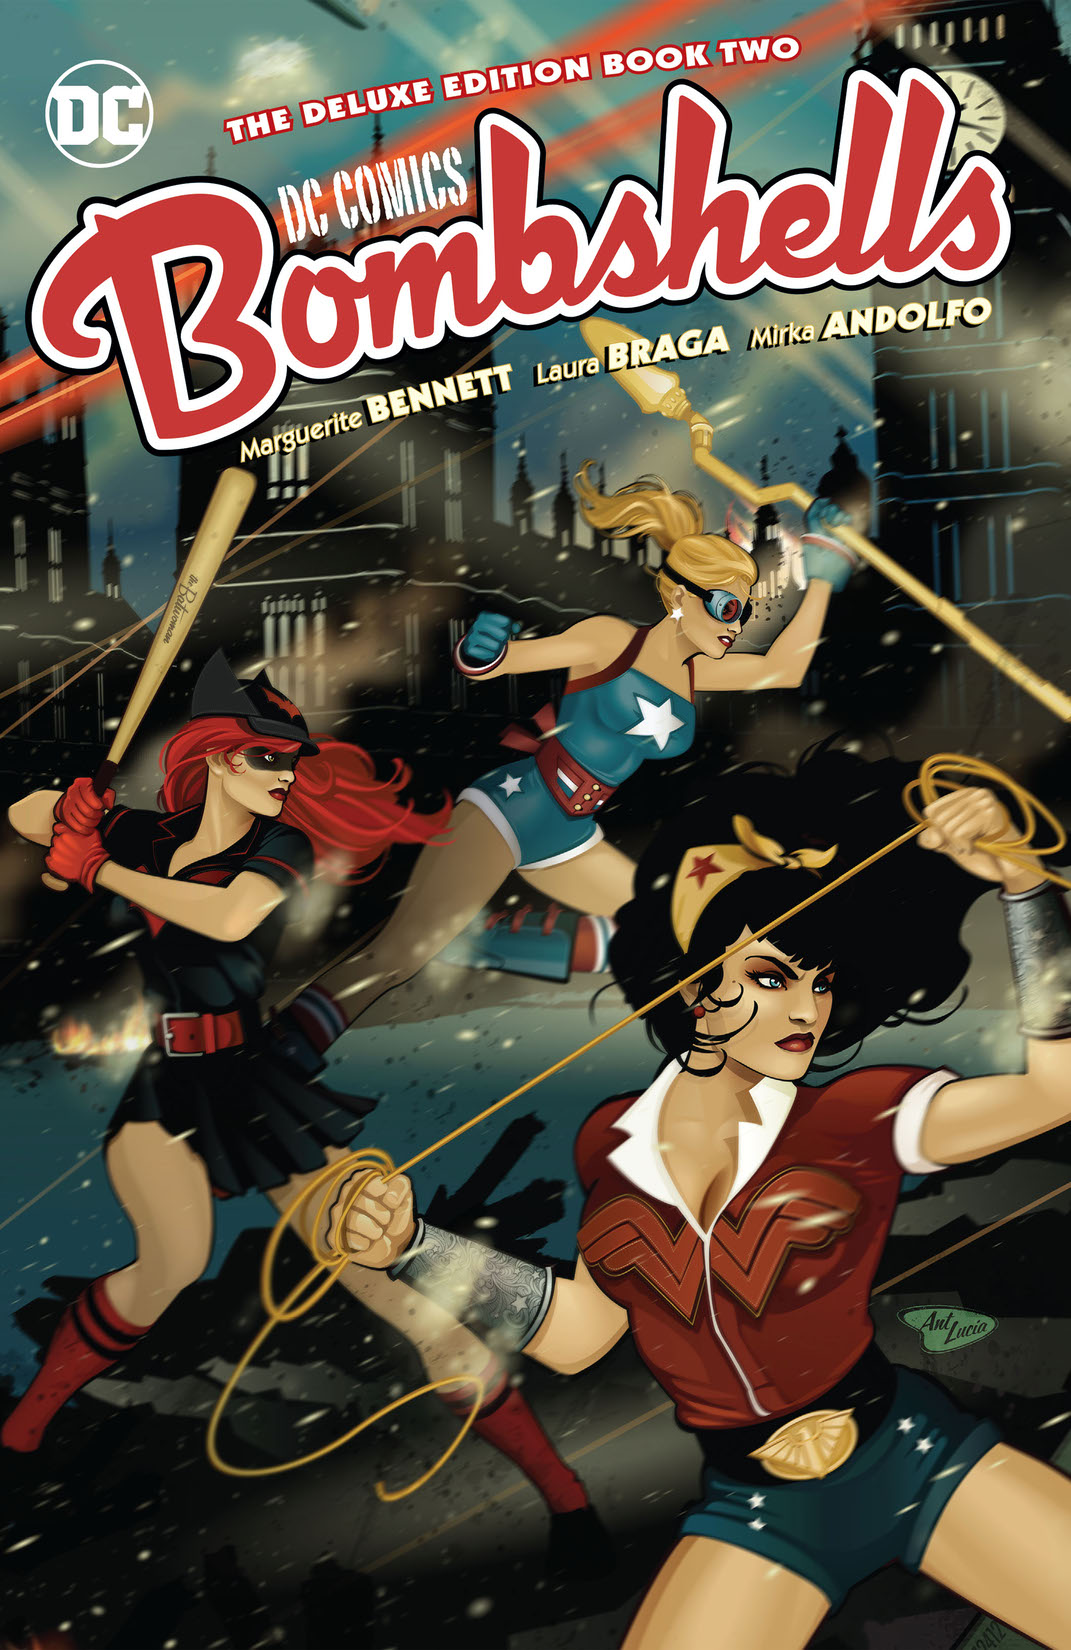 DC Bombshells: The Deluxe Edition Book Two preview images